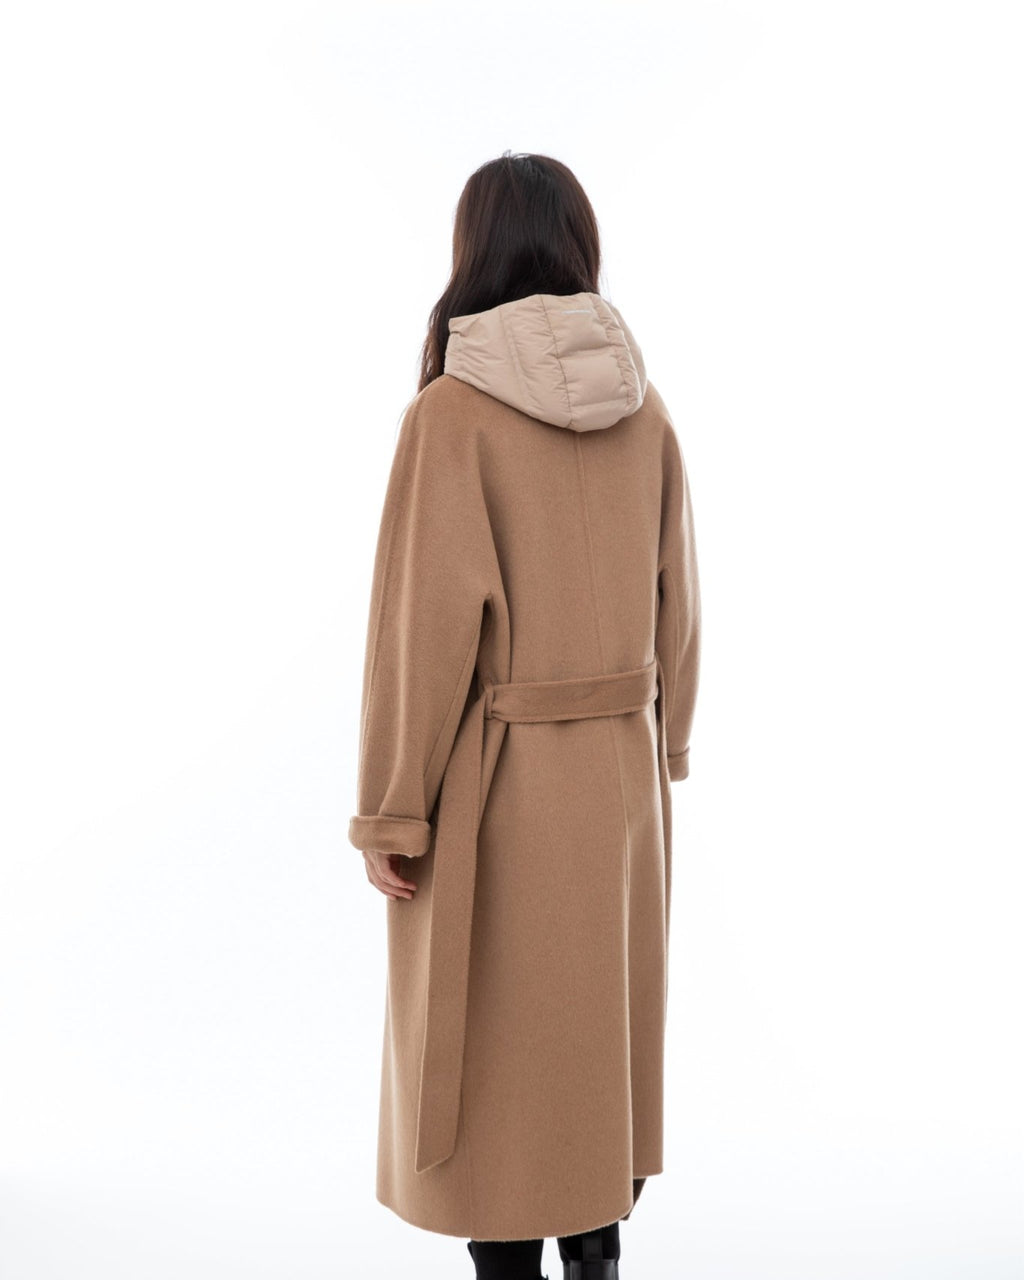 Camel Wool Trench Coat with Waistband - SHIMENG